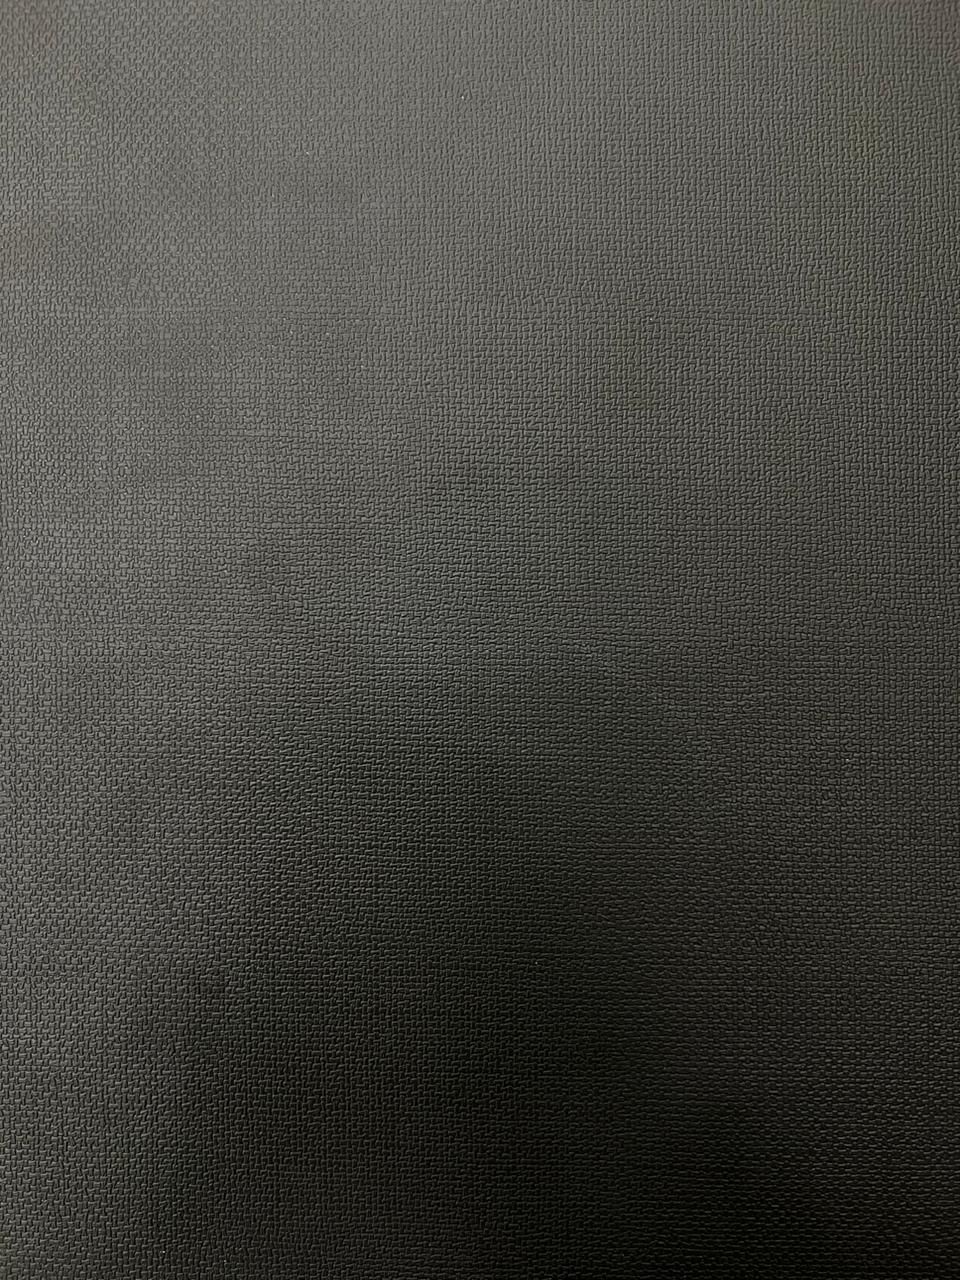 Oxford textured laminate sheet in India